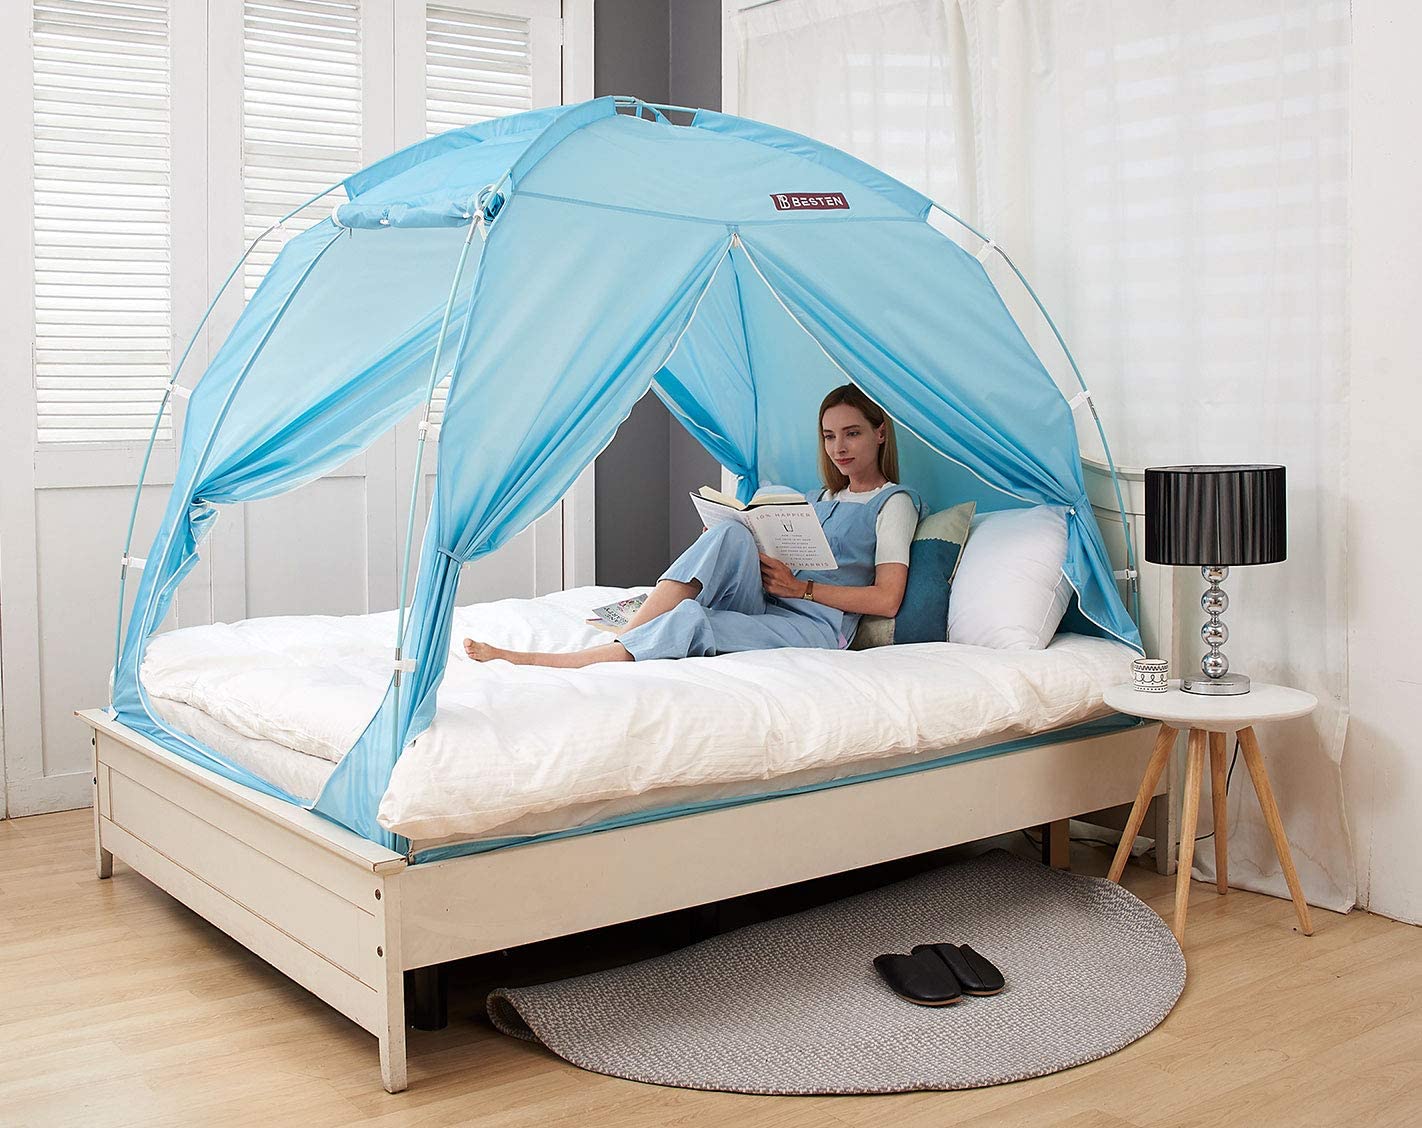 Explopur Tent On Bed Size 1 Bed Canopy Bed Tents Indoor Privacy Tent On Bed for Cozy Sleep 